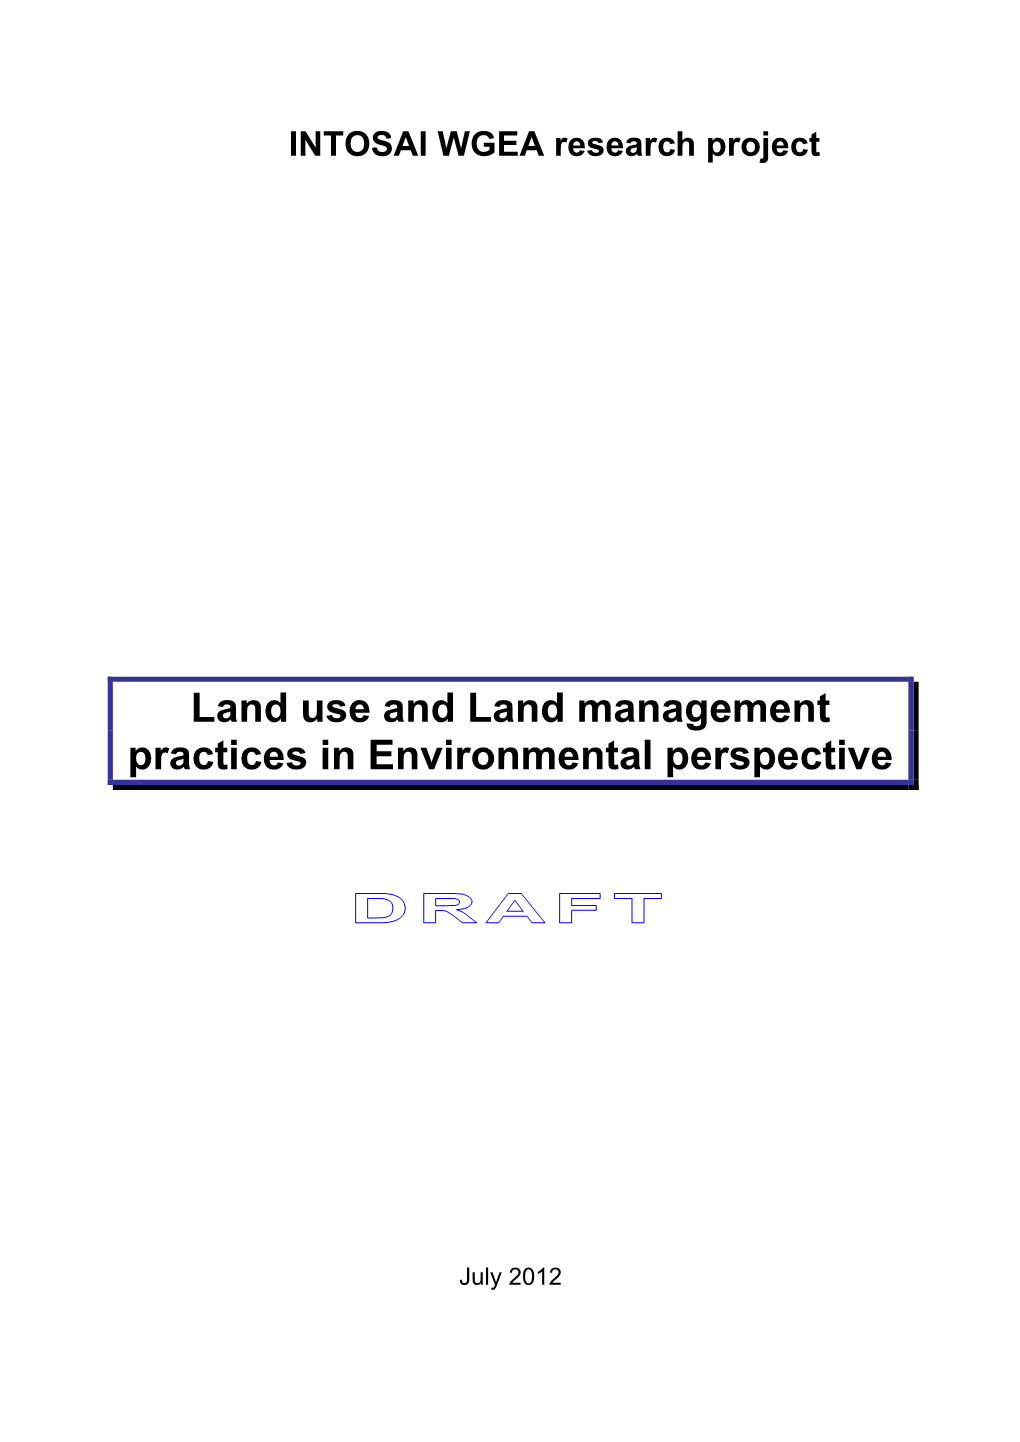 Land Use and Land Management Practices in Environmental Perspective